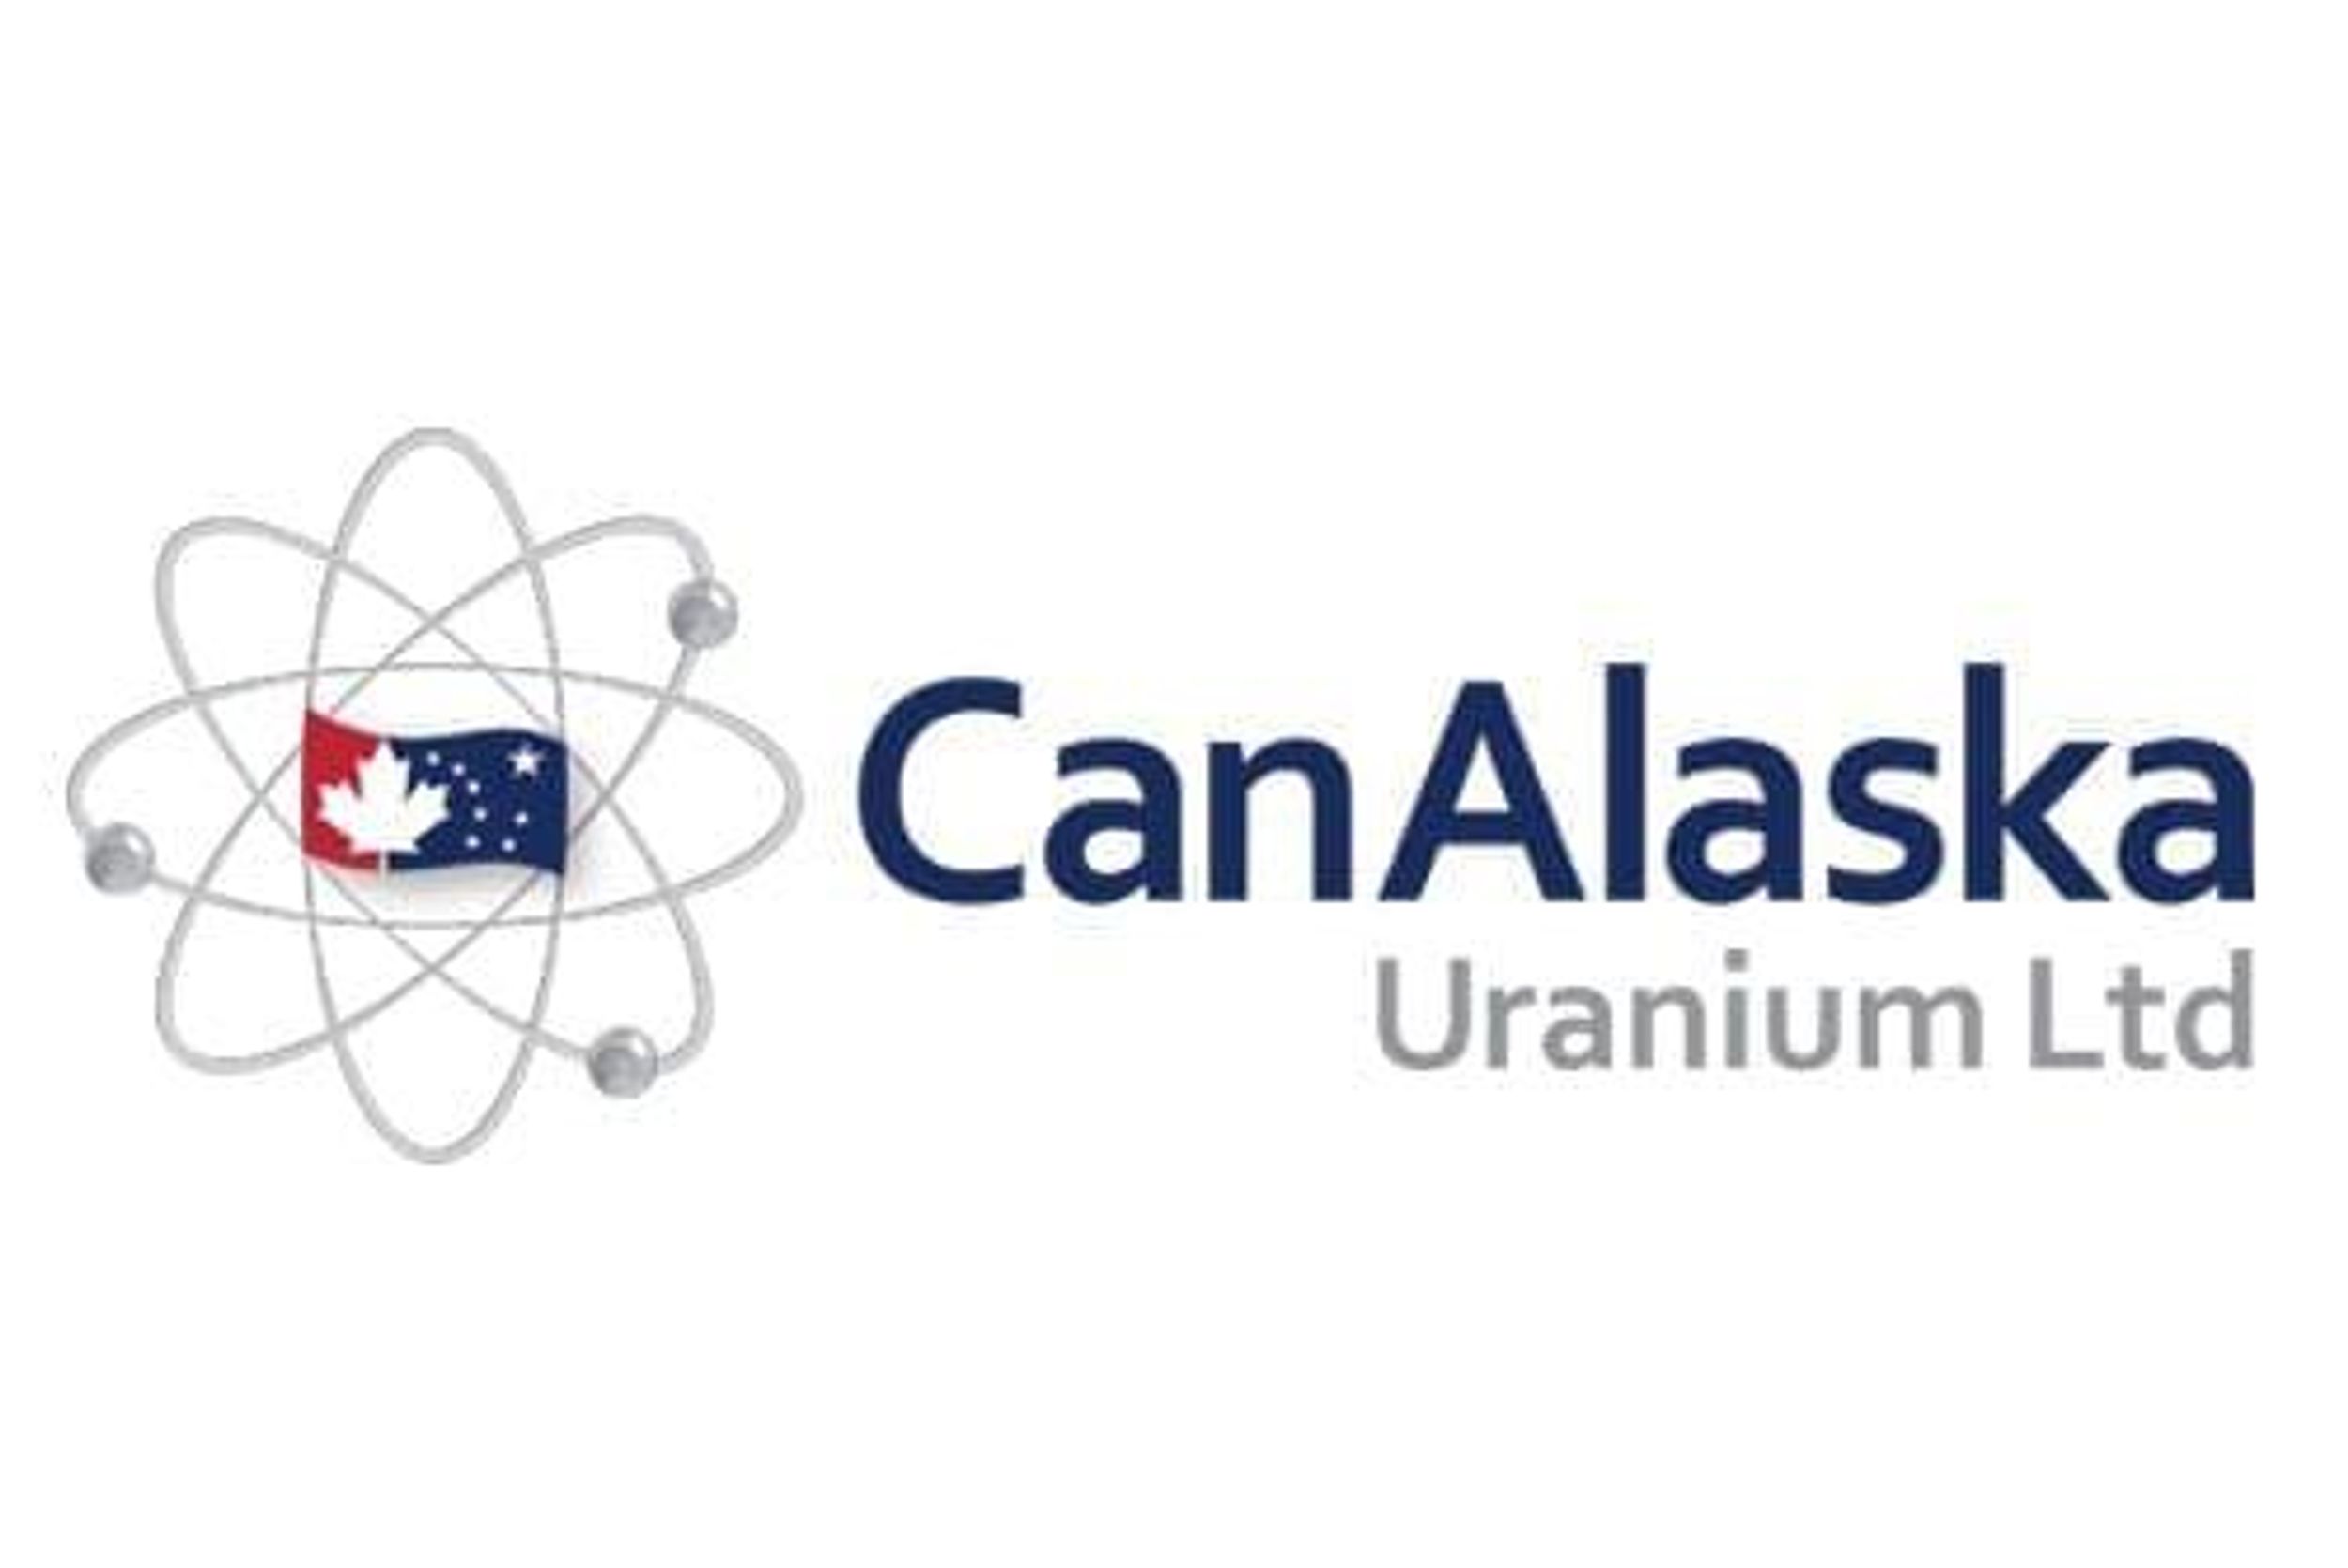 Release - CanAlaska Partner to Spend AUD$5M for 60 of Two Uranium Projects in the Athabasca Basin